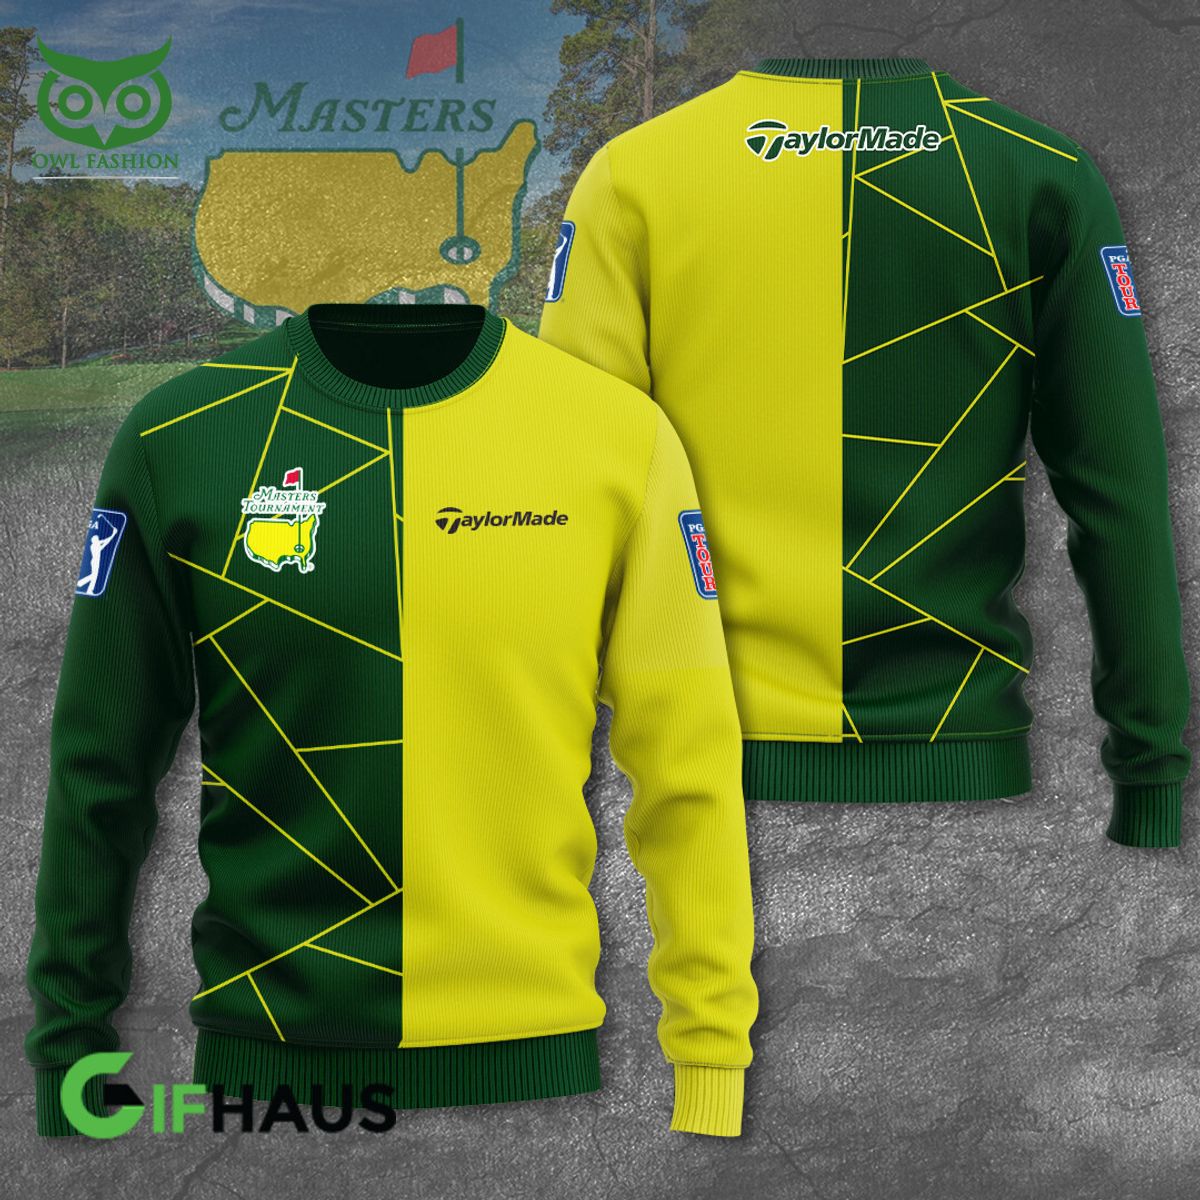 taylor made golf master tournament 3d polo hoodie longsleeves 3 APqwc